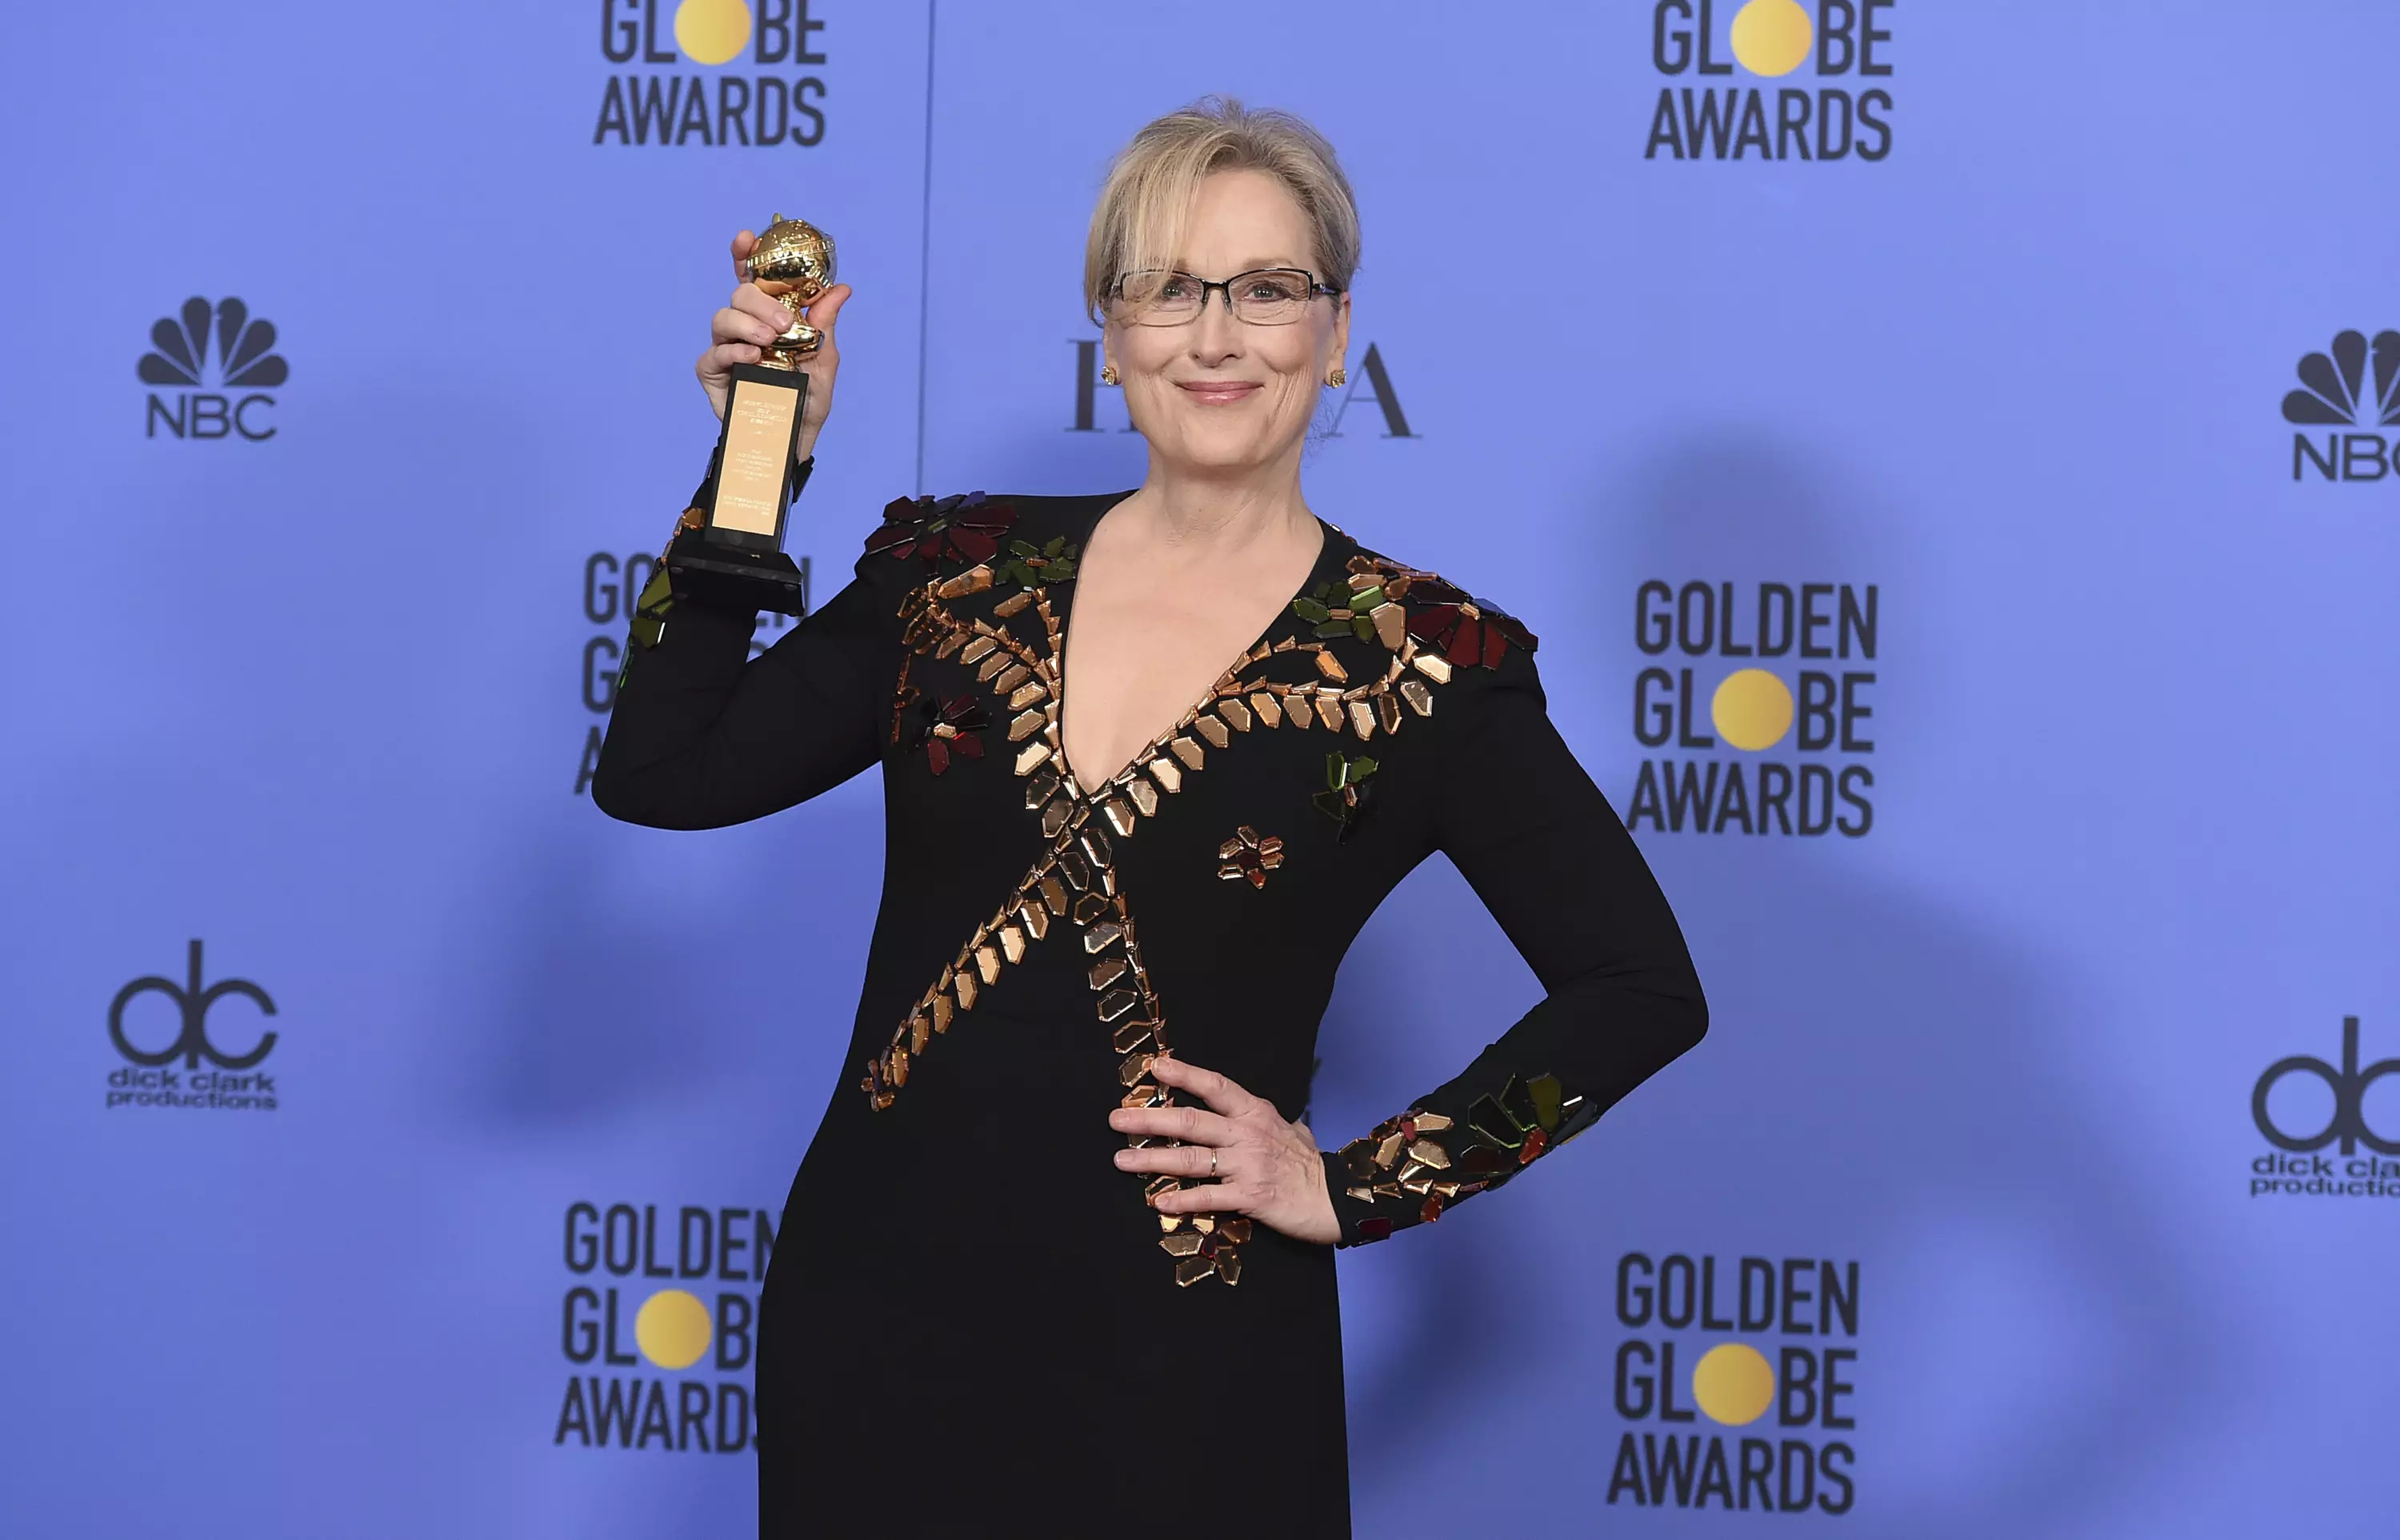 Meryl Streep Used Golden Globes Acceptance Speech To Go In On Donald Trump